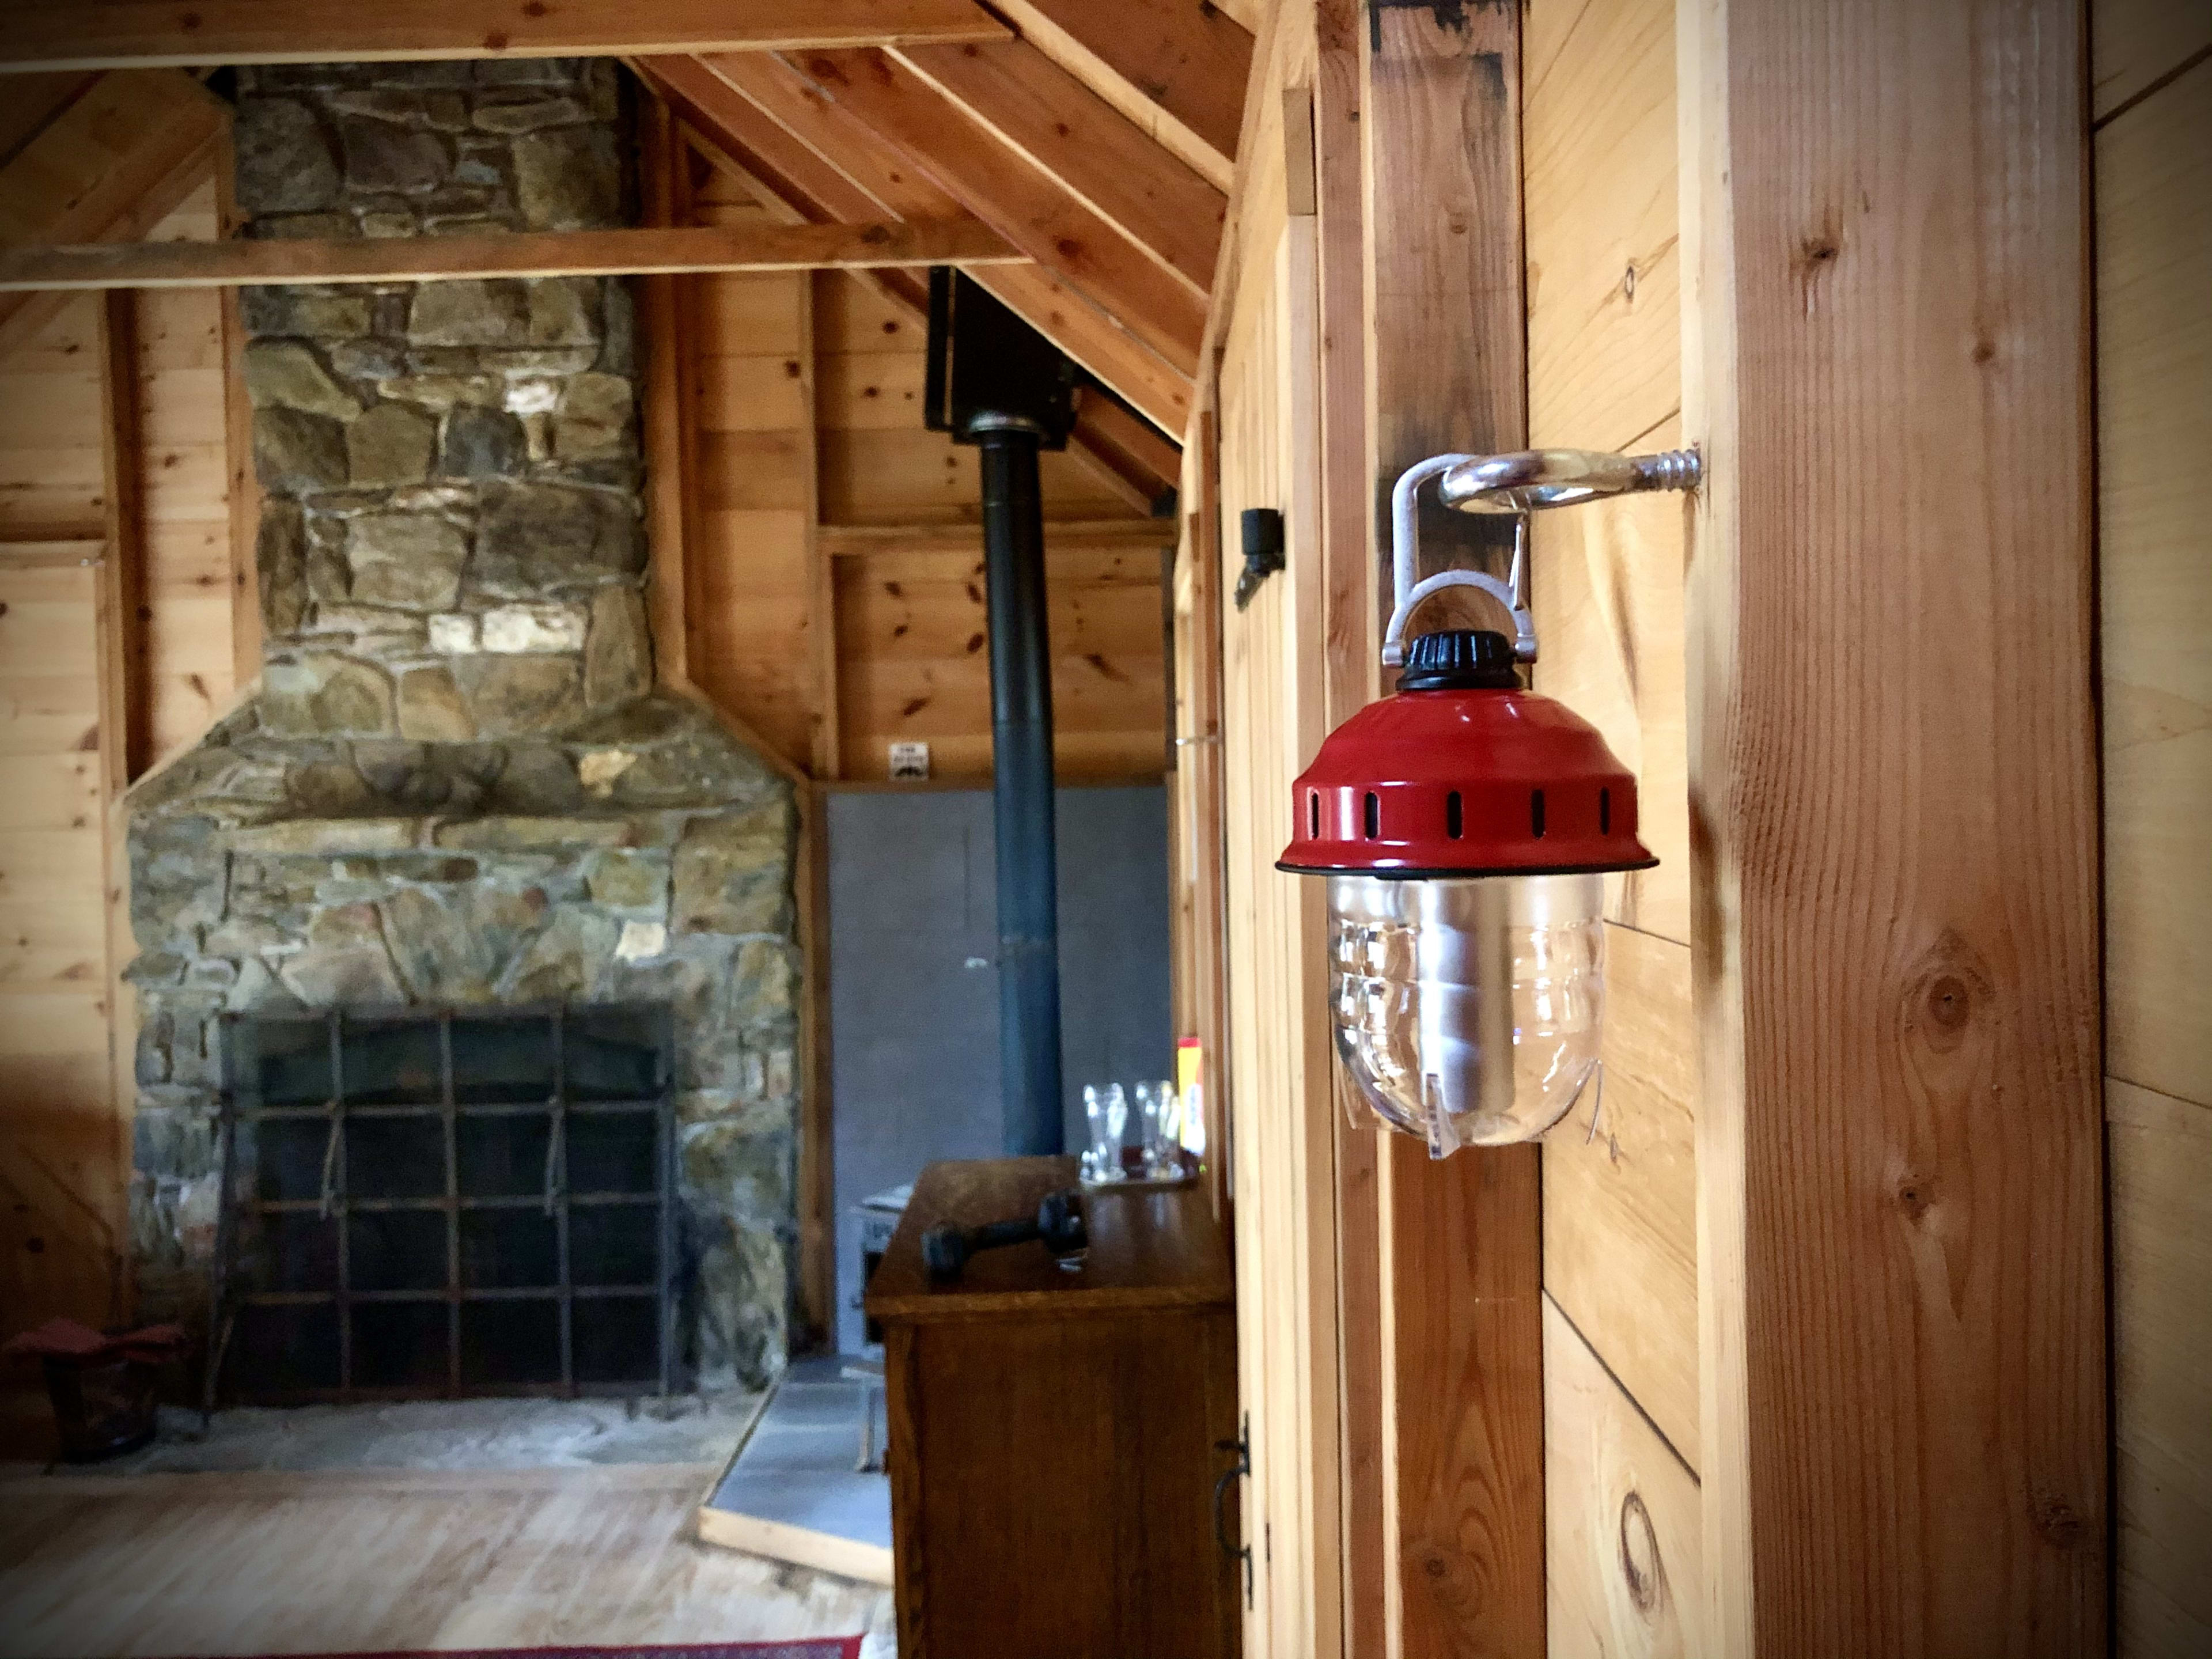 Your stone fireplace is built for wonderful summer fires while your wood burning stove is great for taking the chill out of colder nights.
You'll also have at least three battery powered USB rechargeable lanterns to use for your trip.